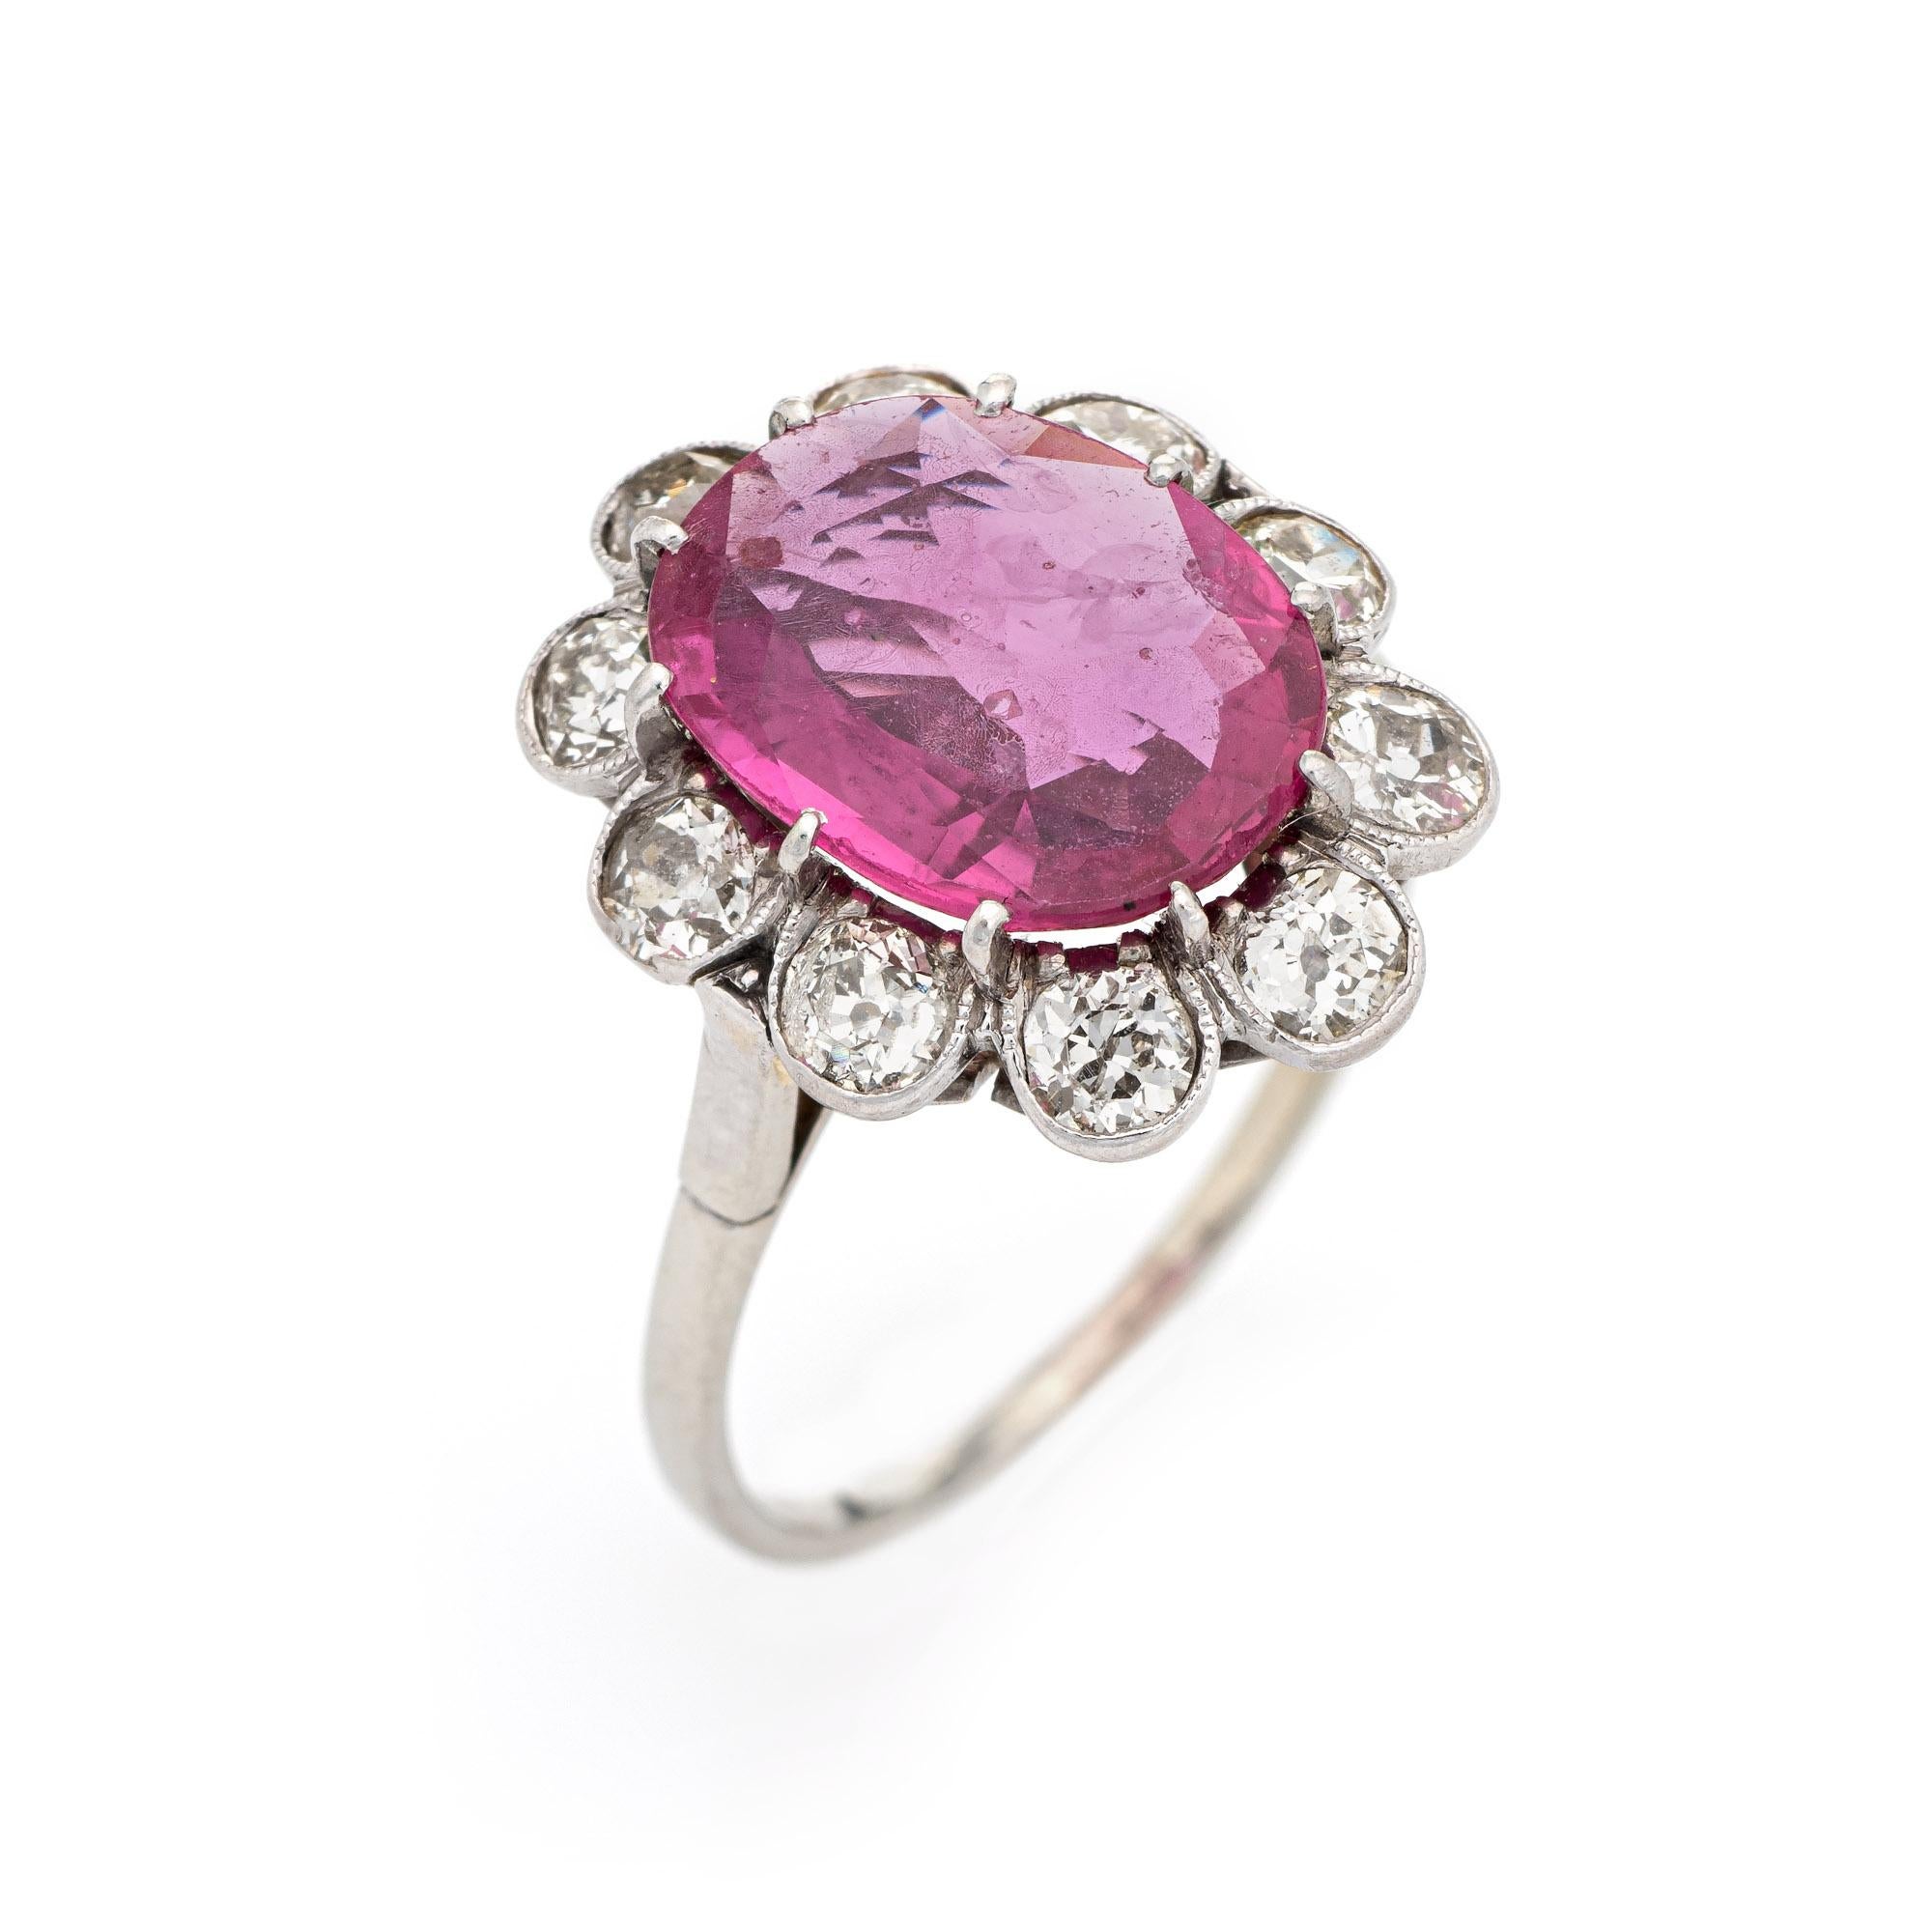 Elegant & finely detailed Art Deco era no heat pink sapphire & diamond ring (circa 1920s to 1930s) crafted in 14k white gold. 

Centrally mounted oval shaped mixed cut natural pink sapphire, approx. 2.70ct (11.67 x 8.83 x 2.86mm) light medium pink